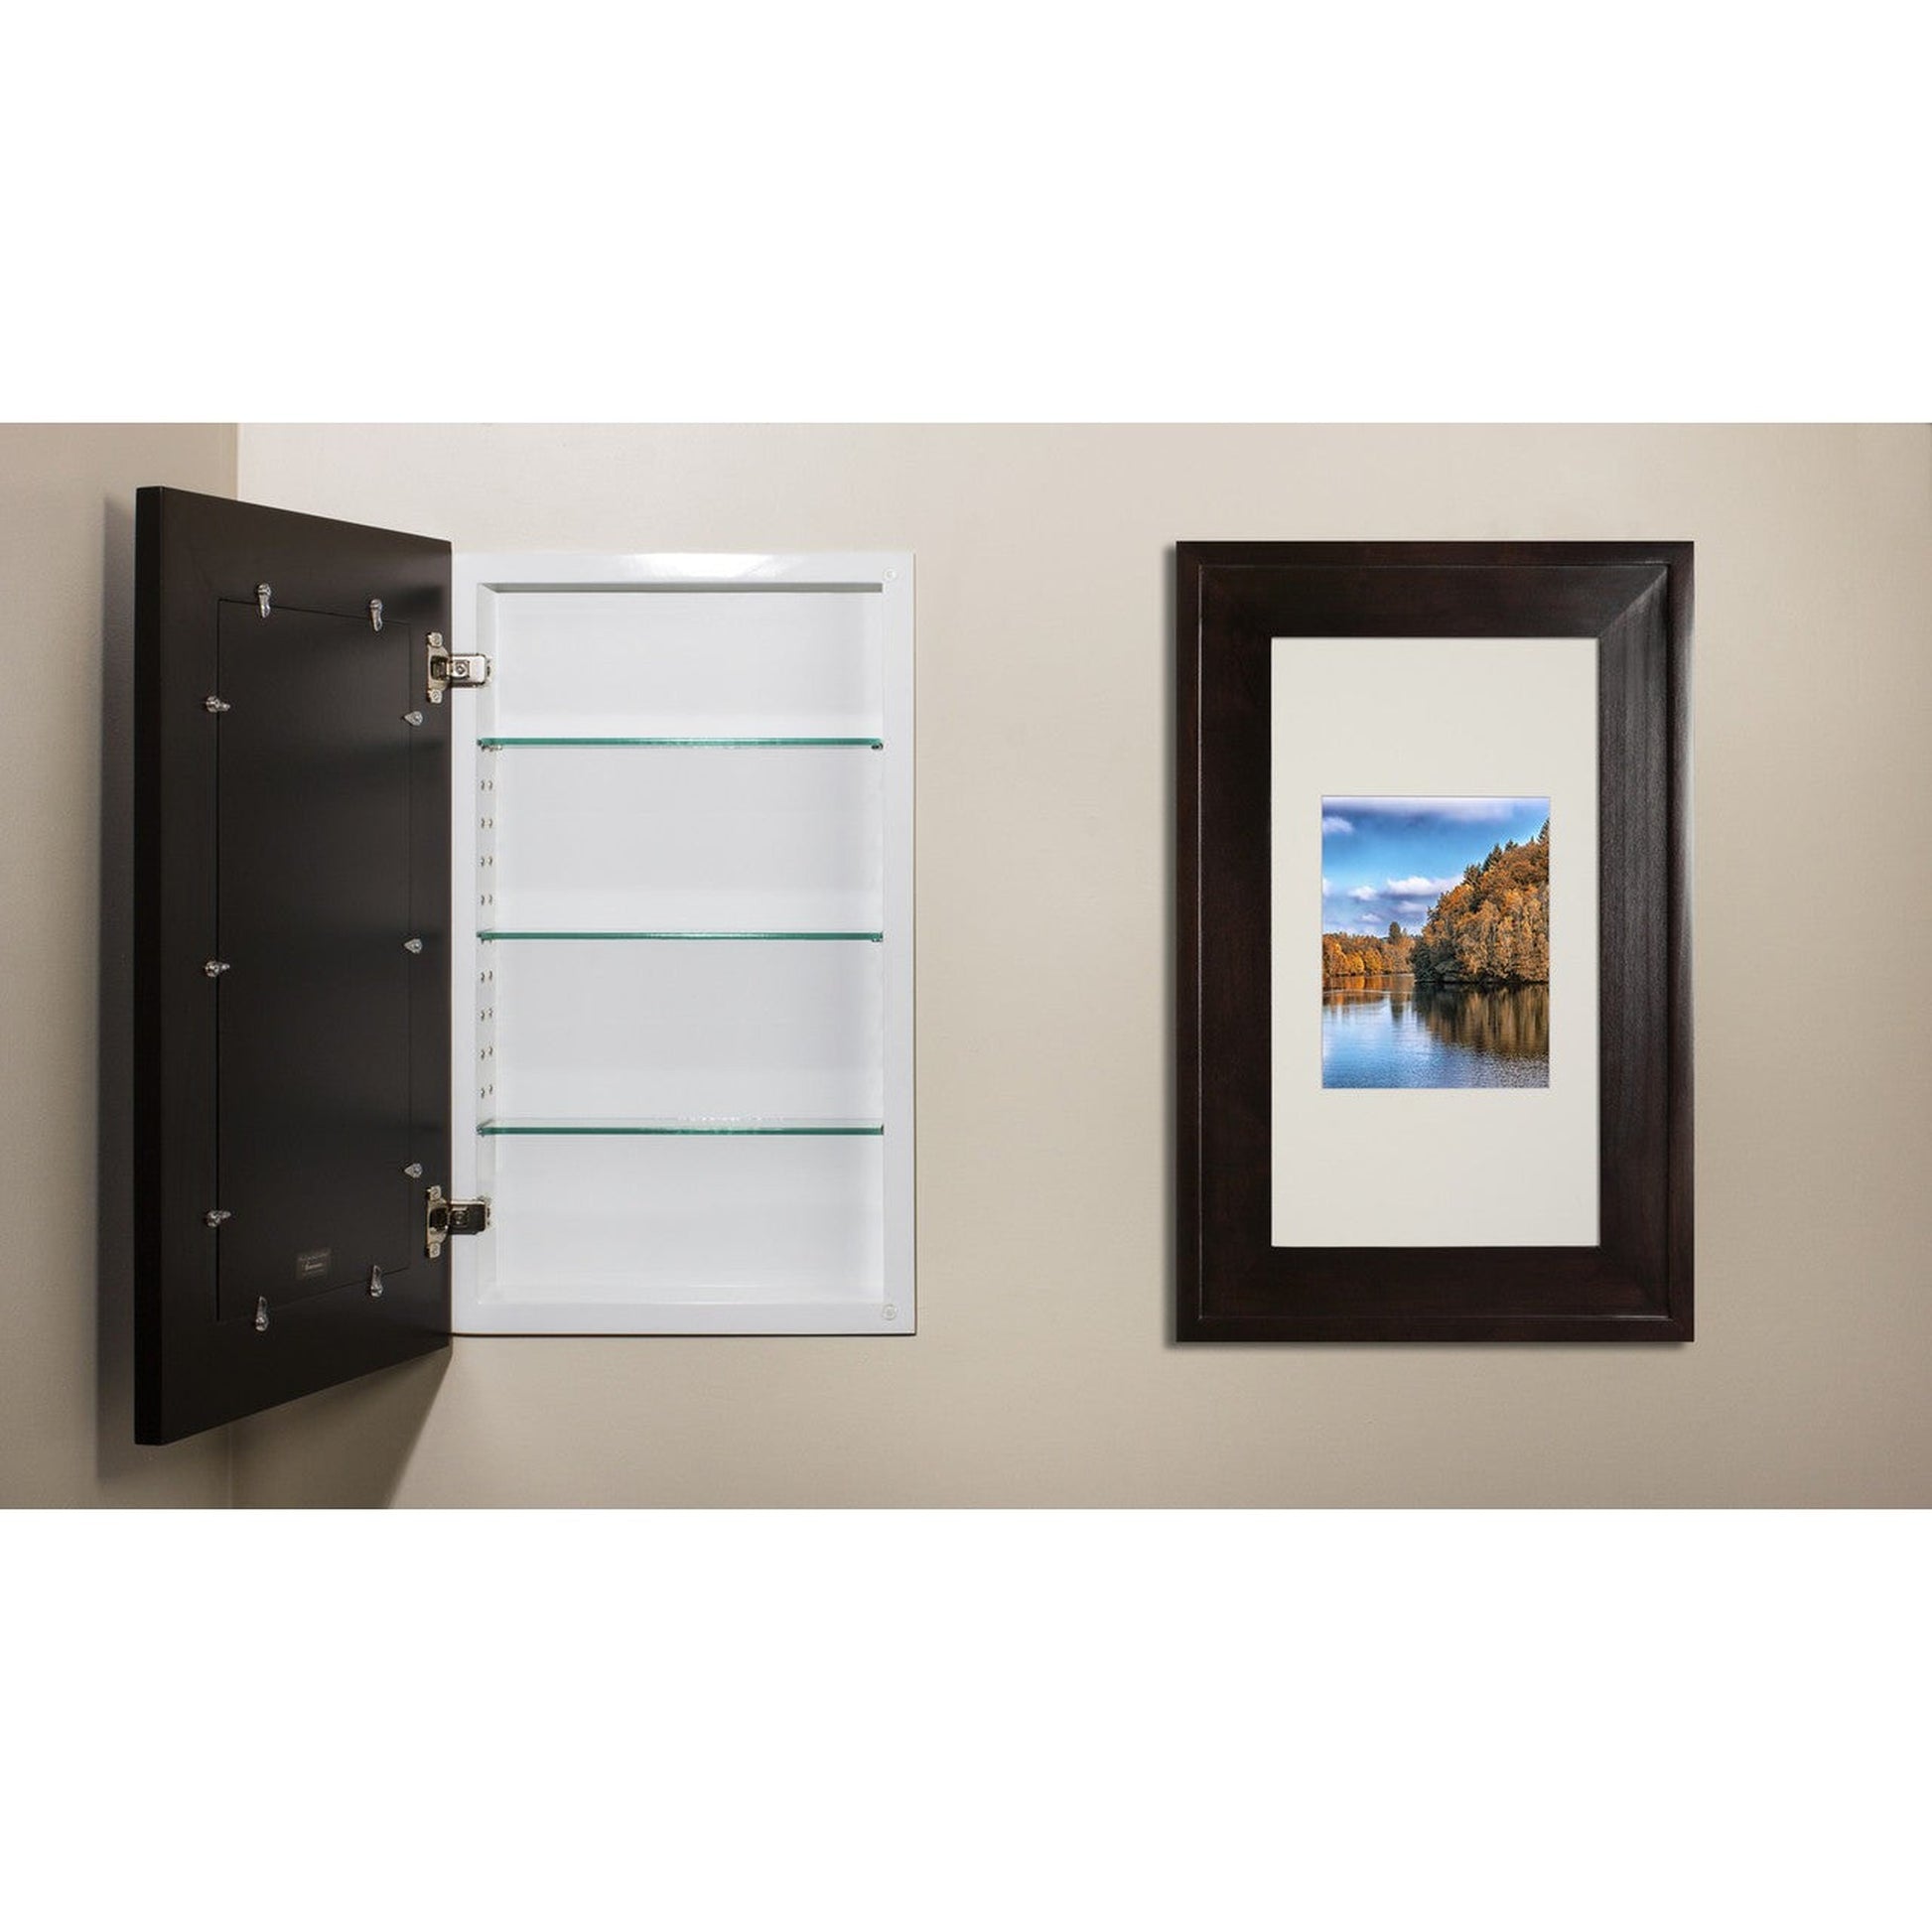 Fox Hollow Furnishings 14" x 24" Coffee Bean Extra Large Natural Interior Standard Depth Recessed Picture Frame Medicine Cabinet With Mirror and White Three Opening Matting